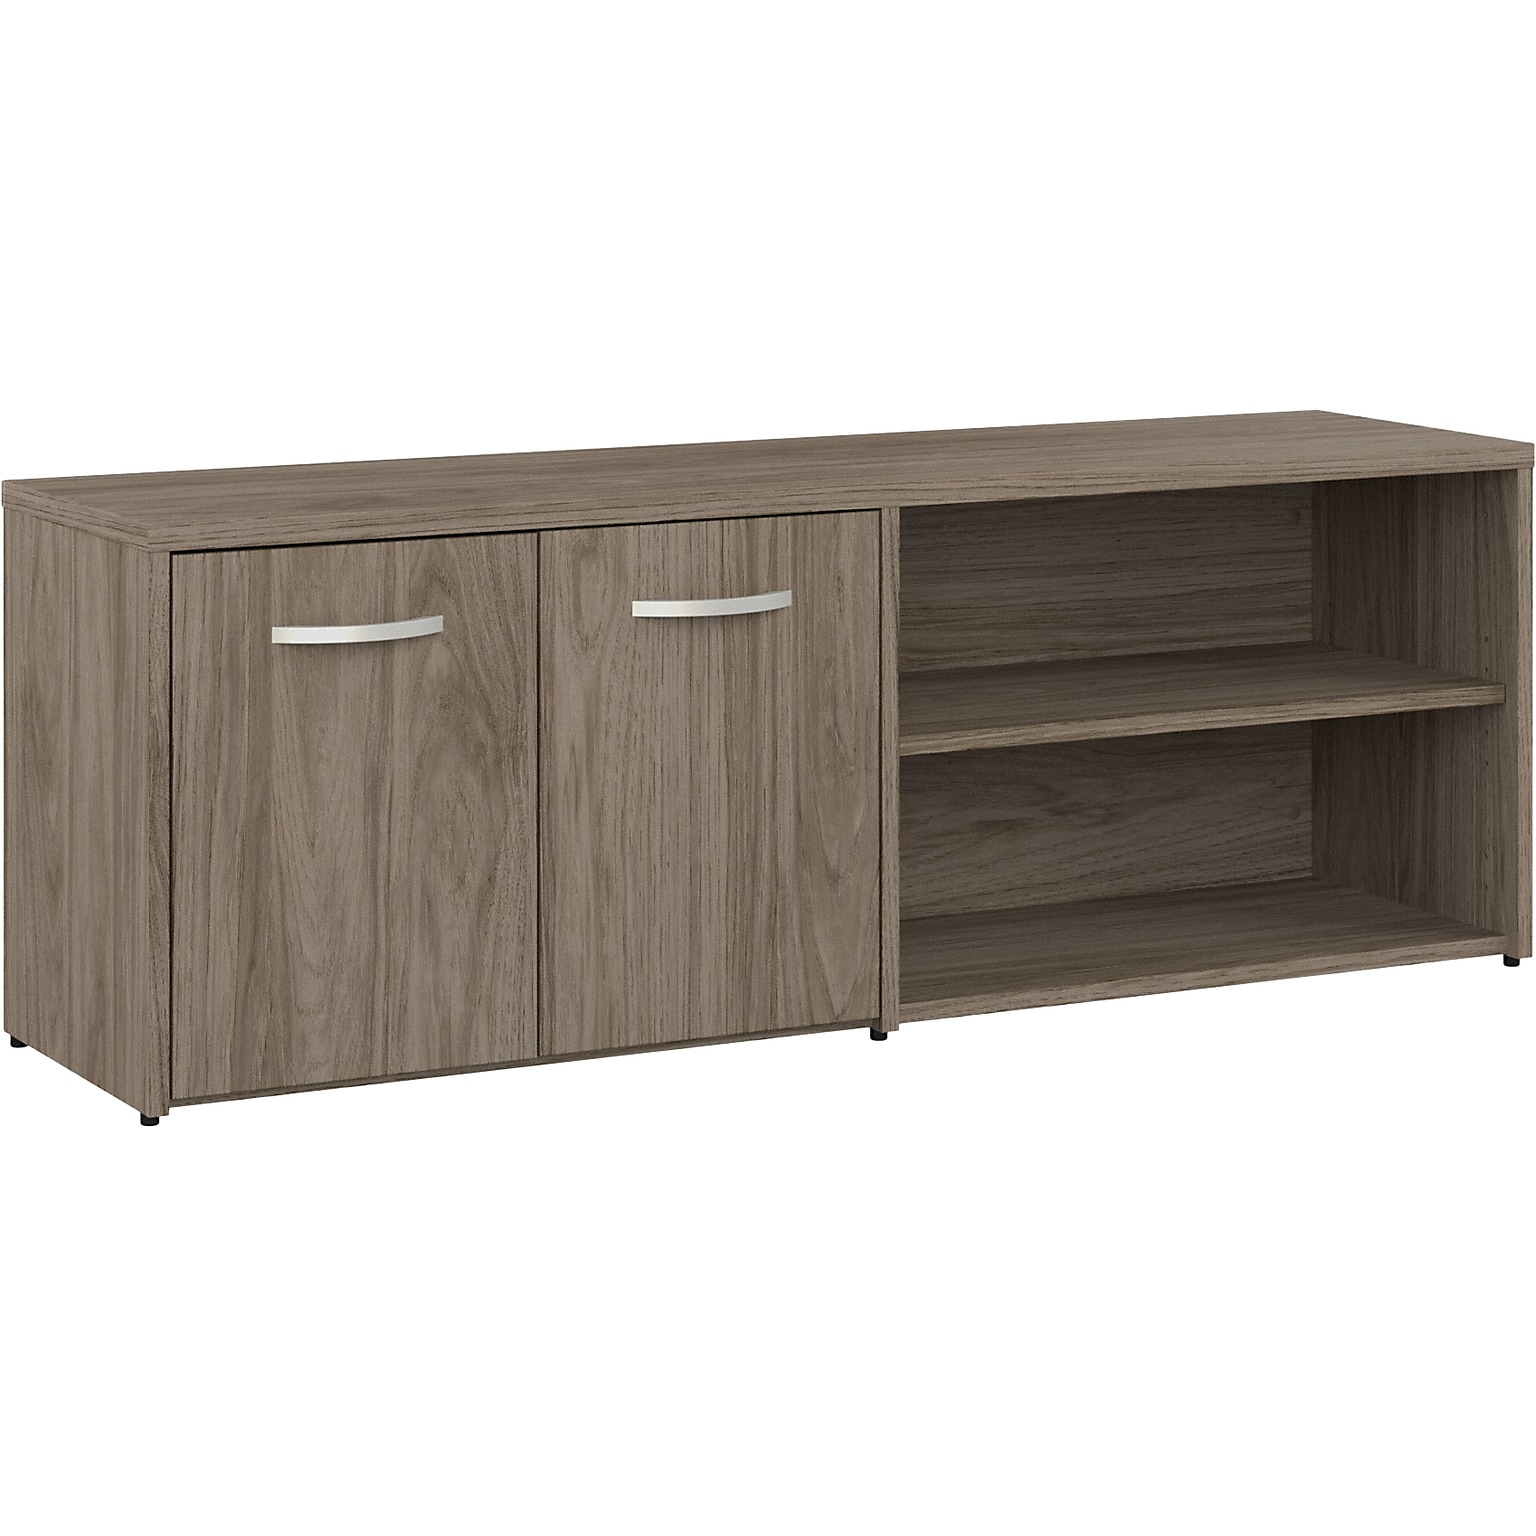 Bush Business Furniture Hybrid 21 Low Storage Cabinet with Doors and Shelves, Modern Hickory (HYS160MH-Z)